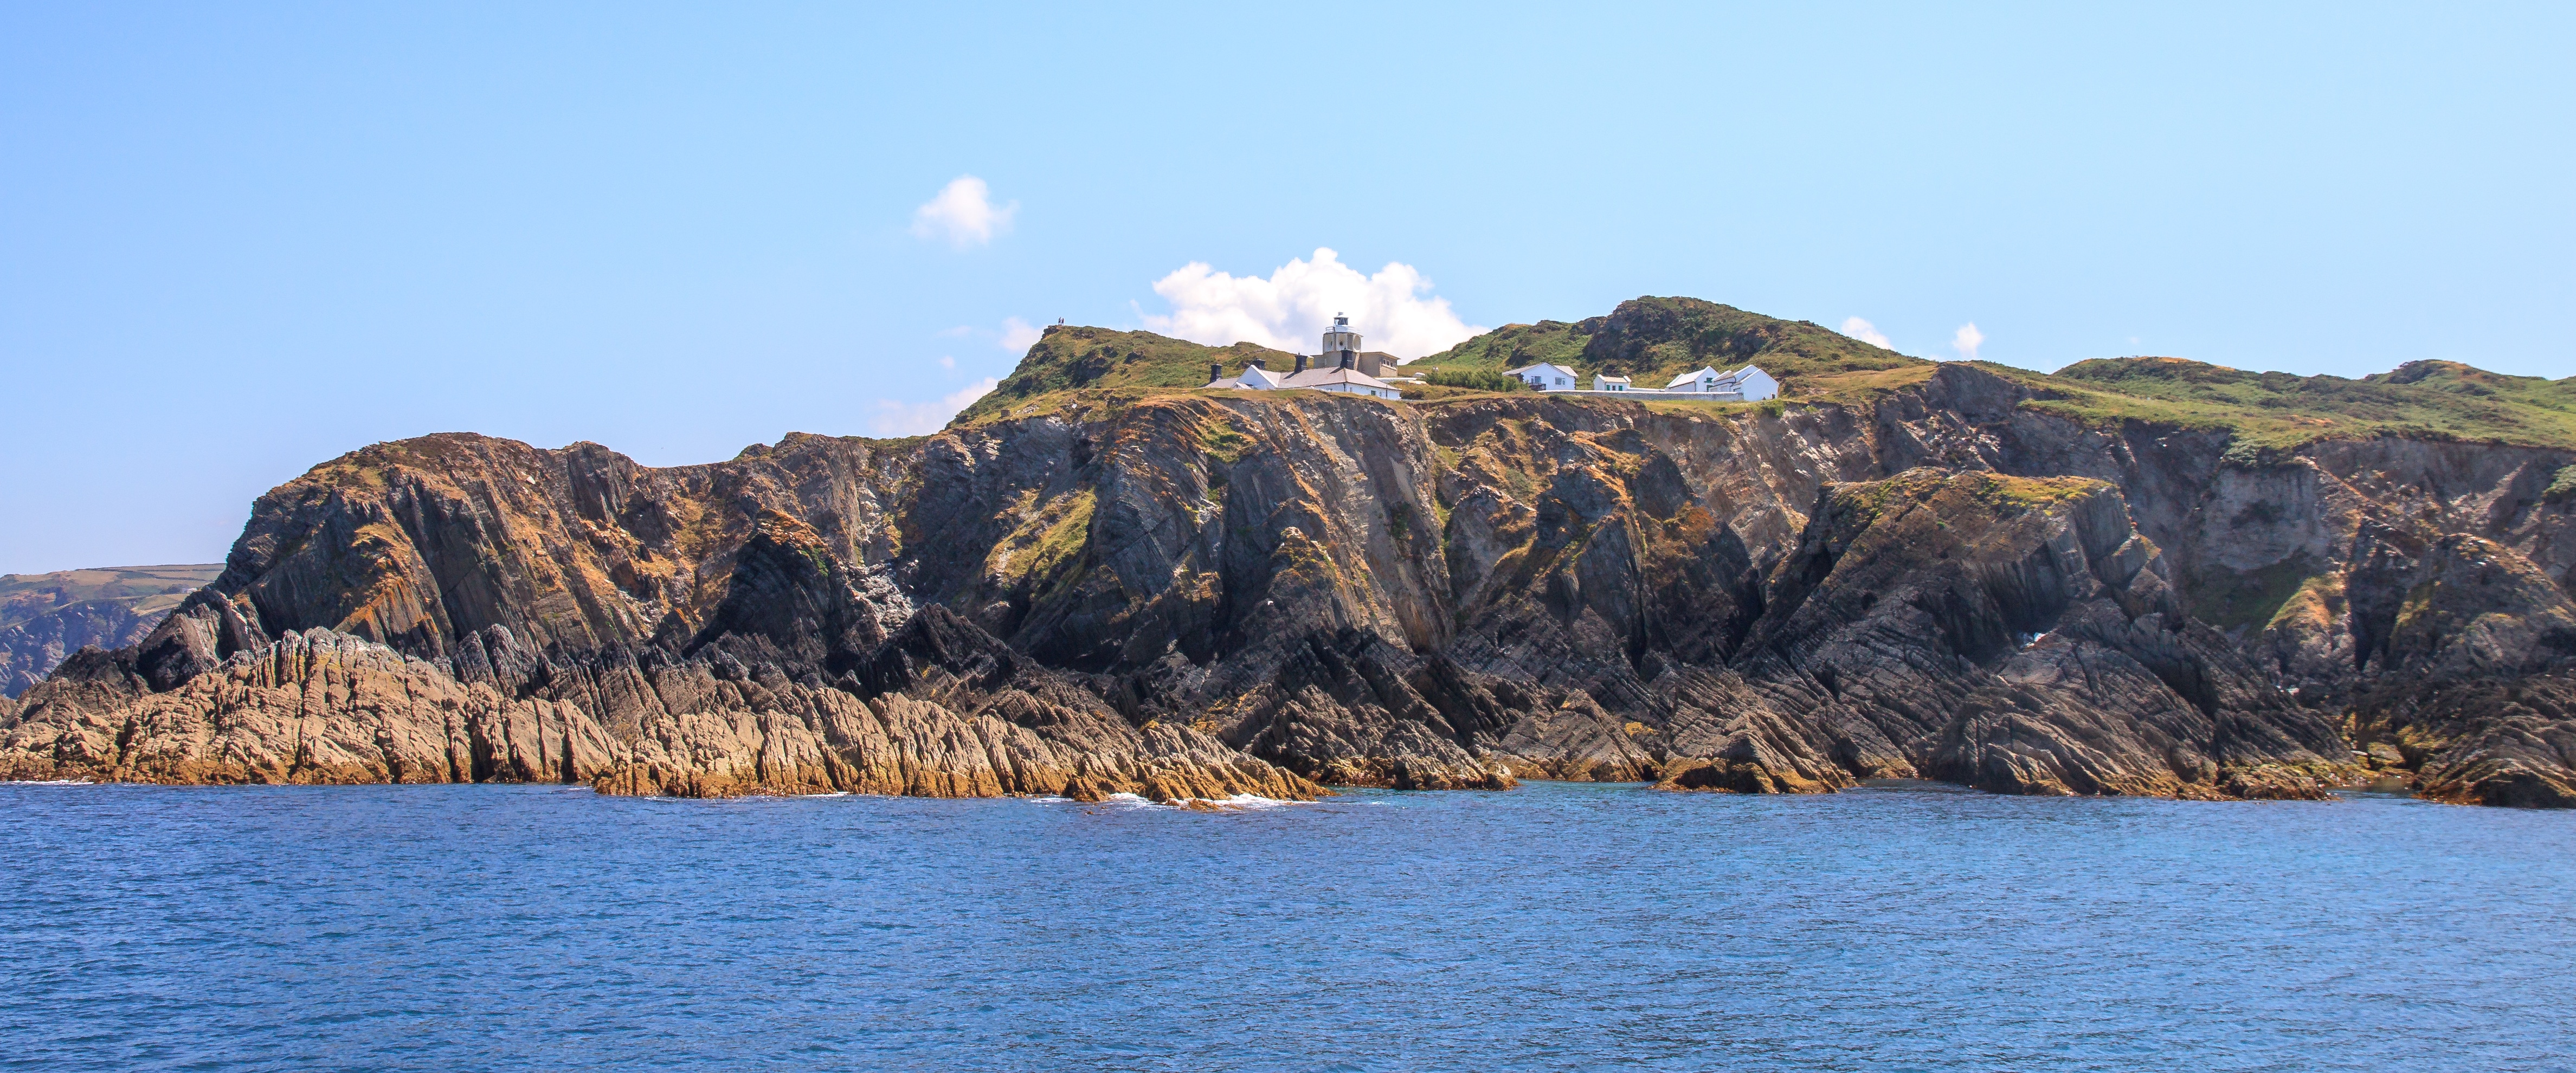 Bull Point and Lighthouse from the sea